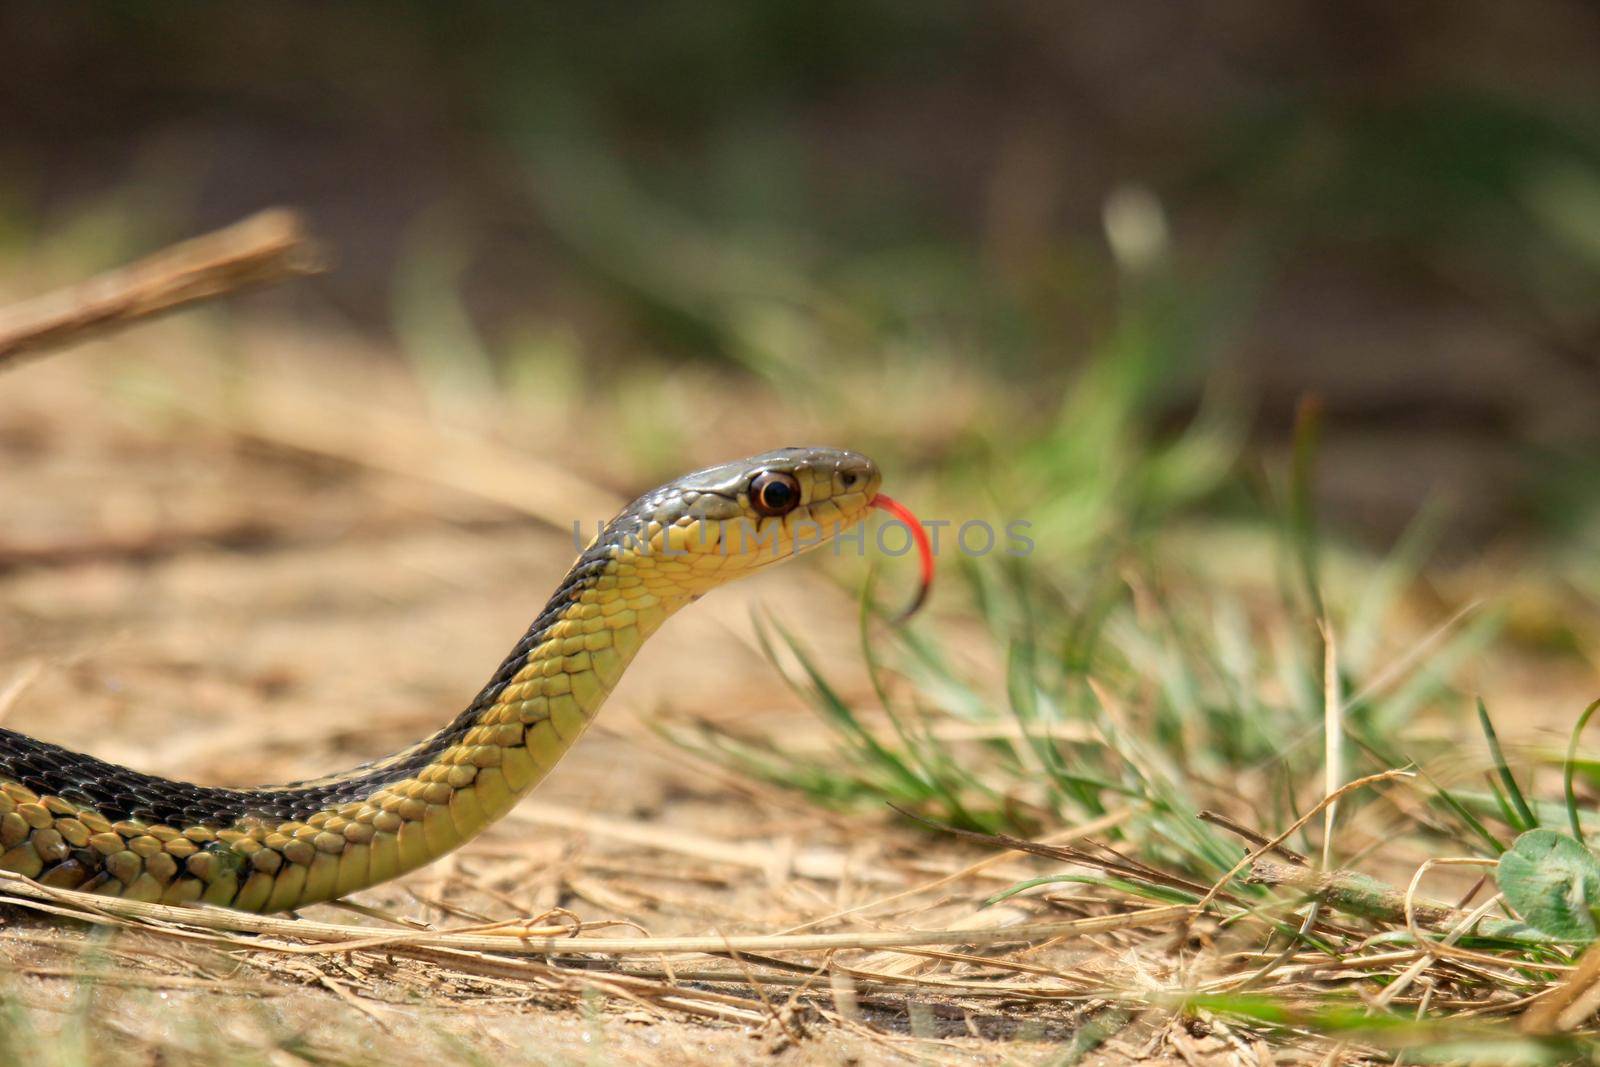 A photo of a young eastern garter snake in early spring in Canada by mynewturtle1